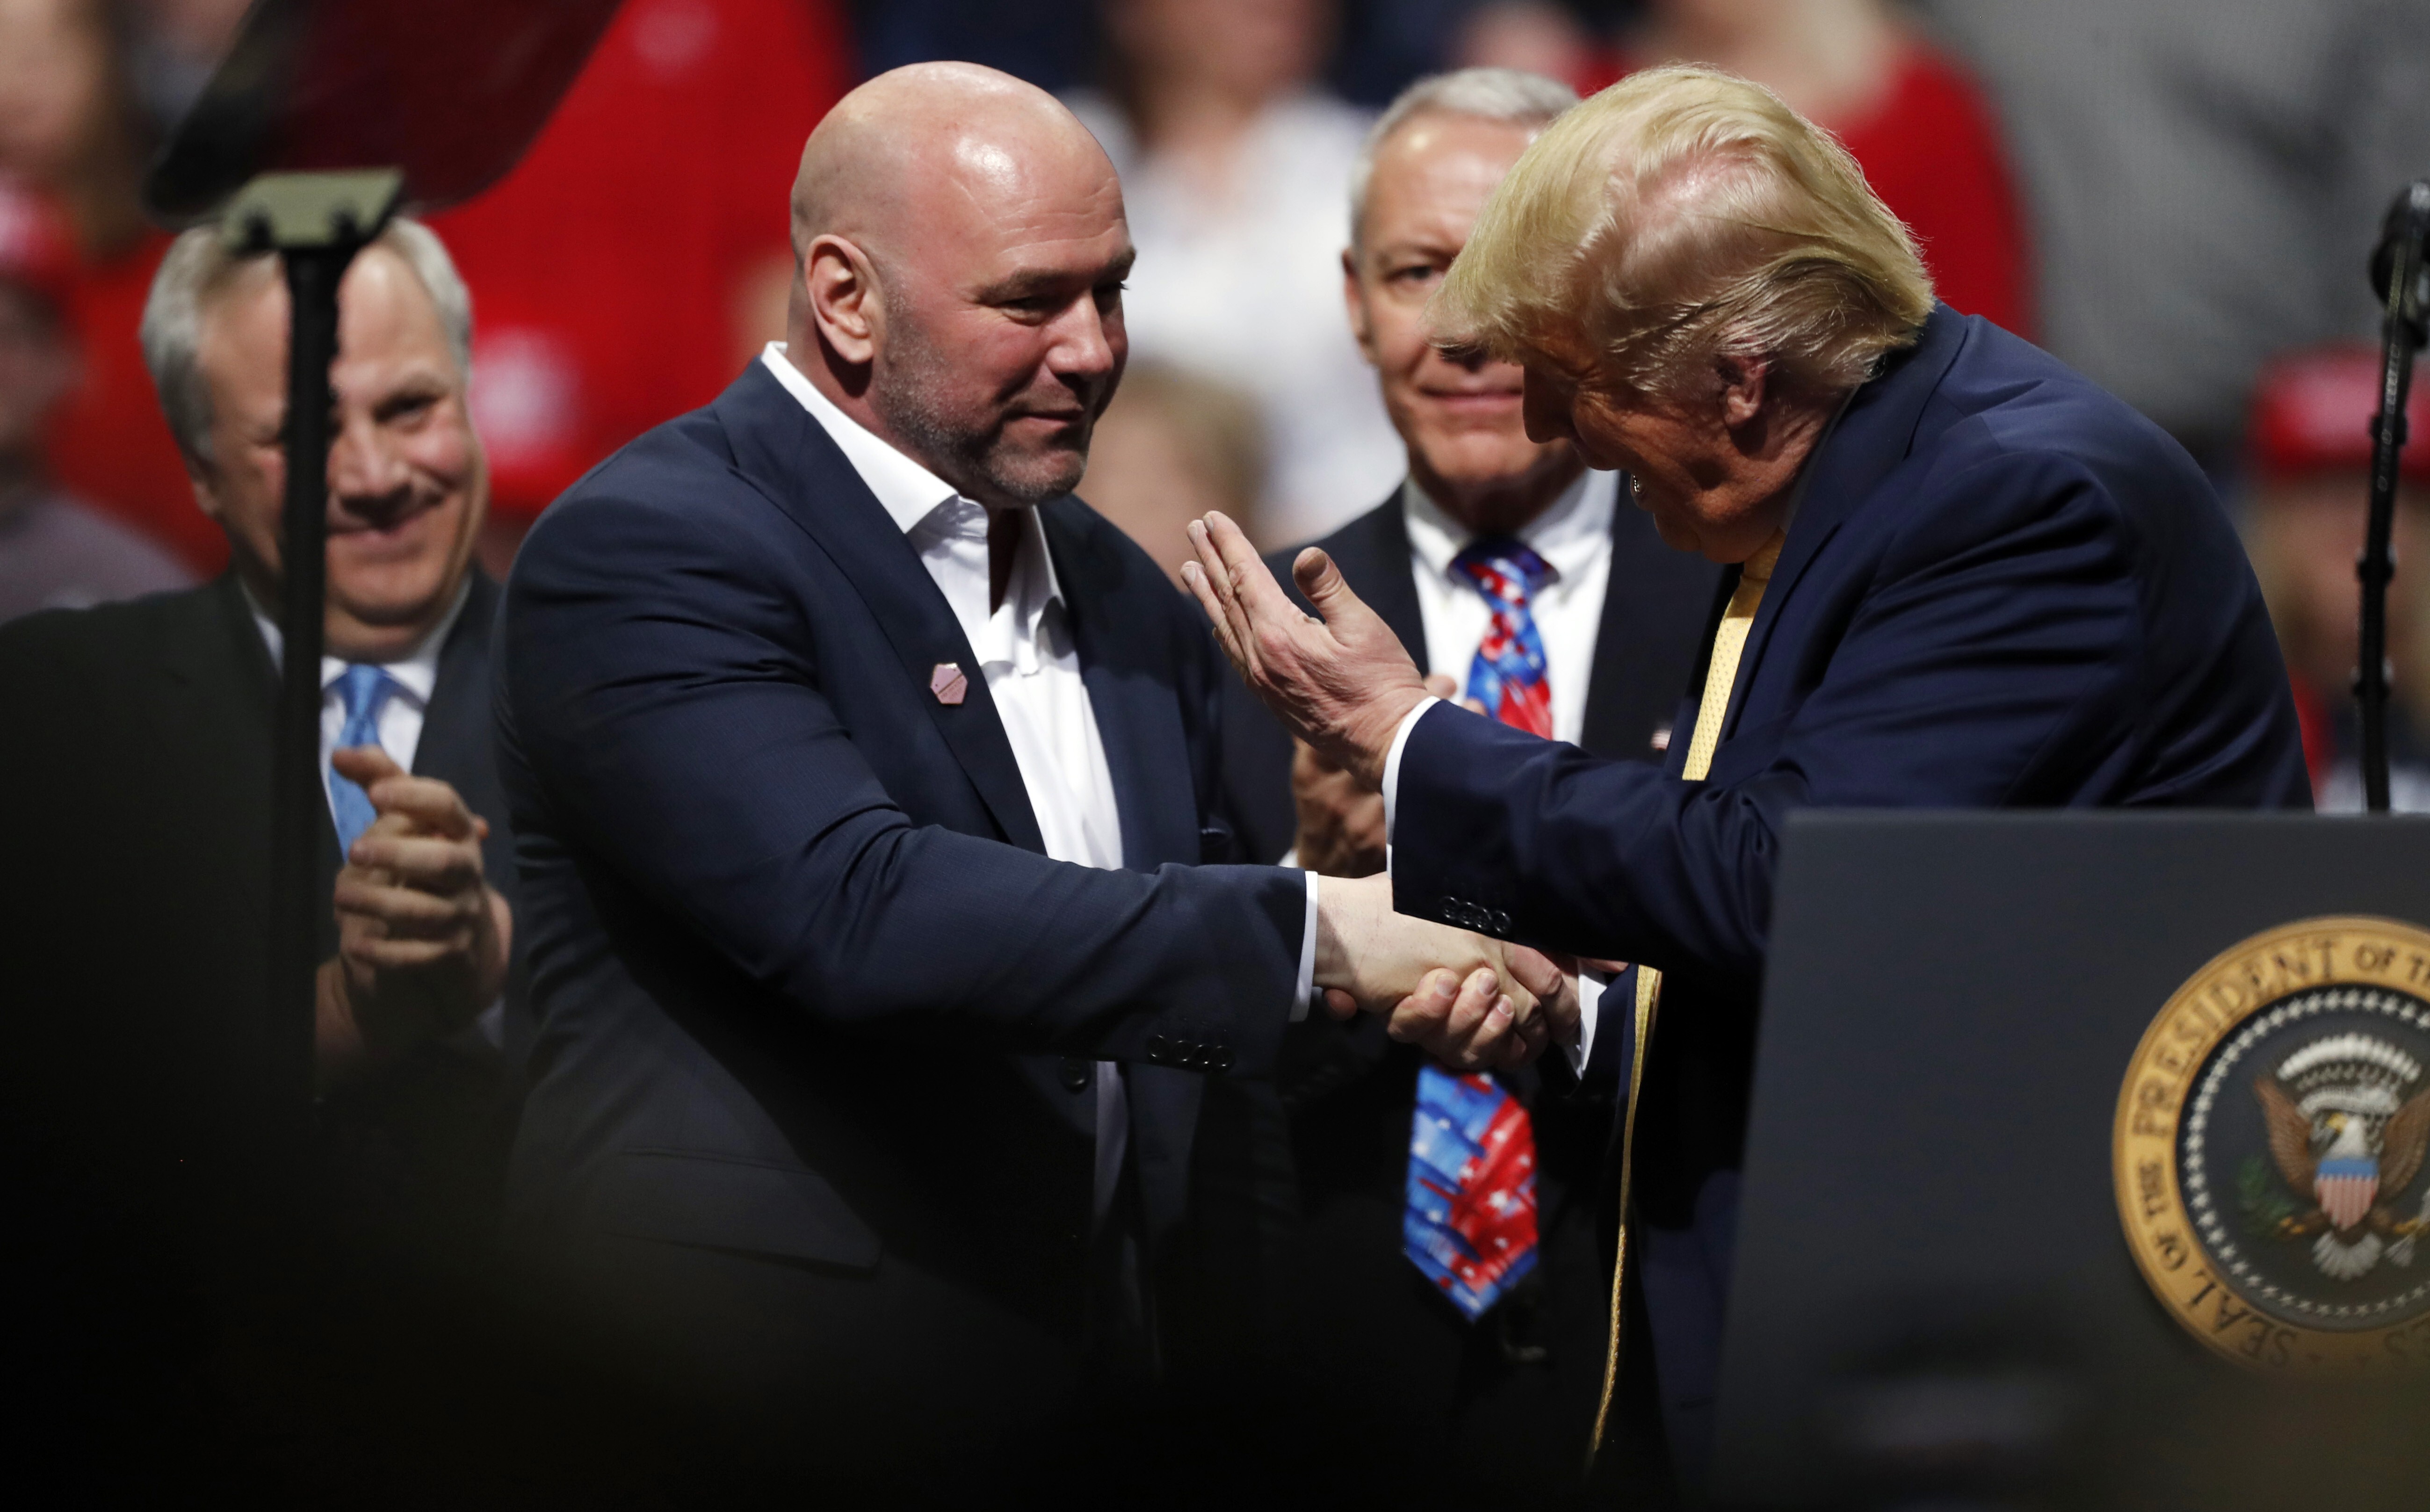 President Donald Trump greets UFC president Dana White at a campaign rally in Colorado in February. Photo: AP